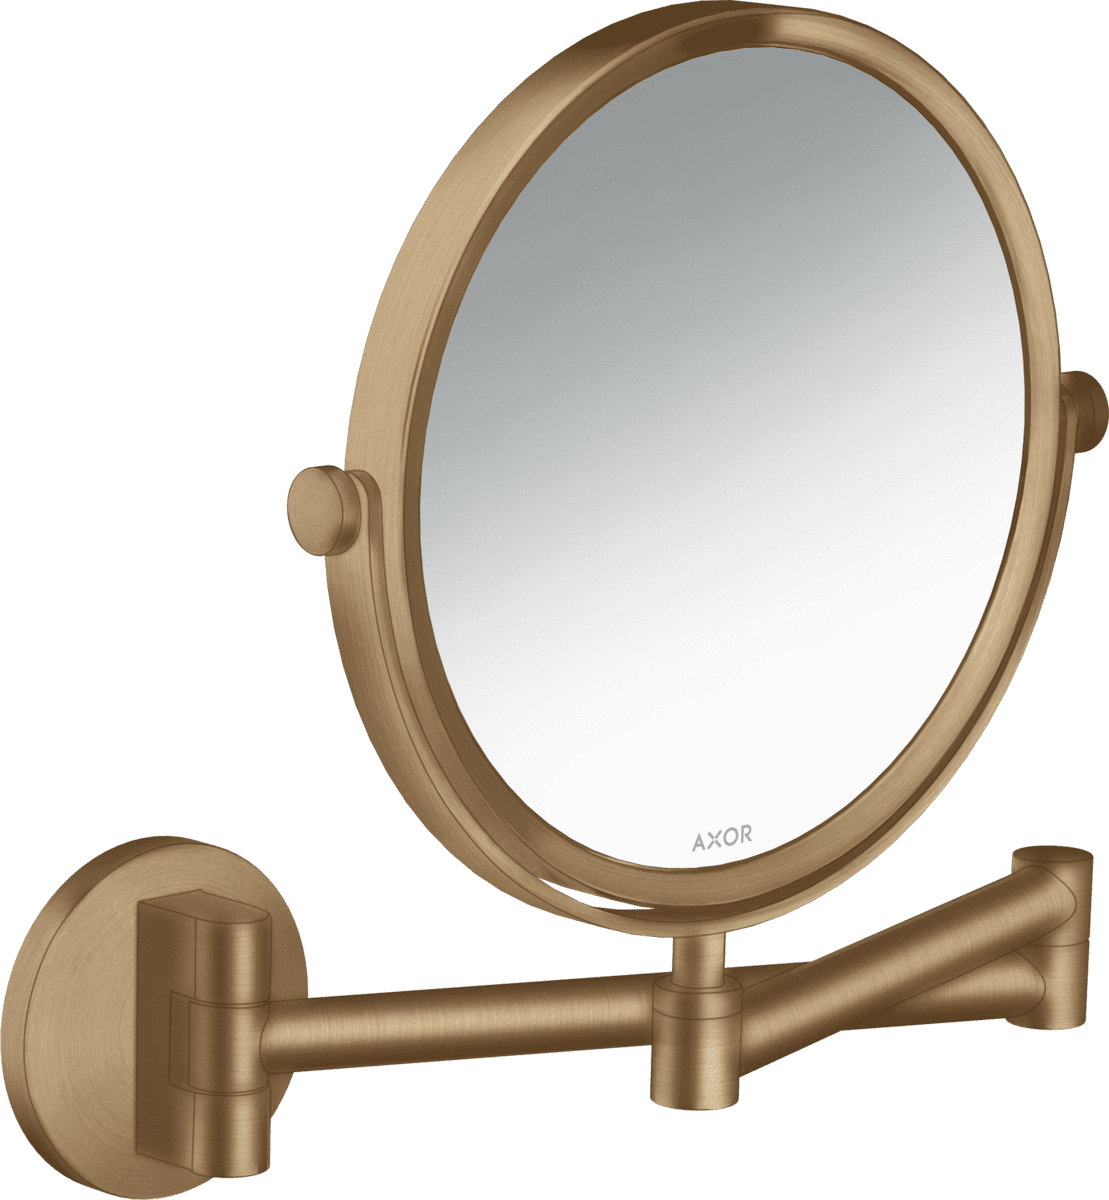 Picture of HANSGROHE AXOR Universal Circular Shaving mirror #42849140 - Brushed Bronze